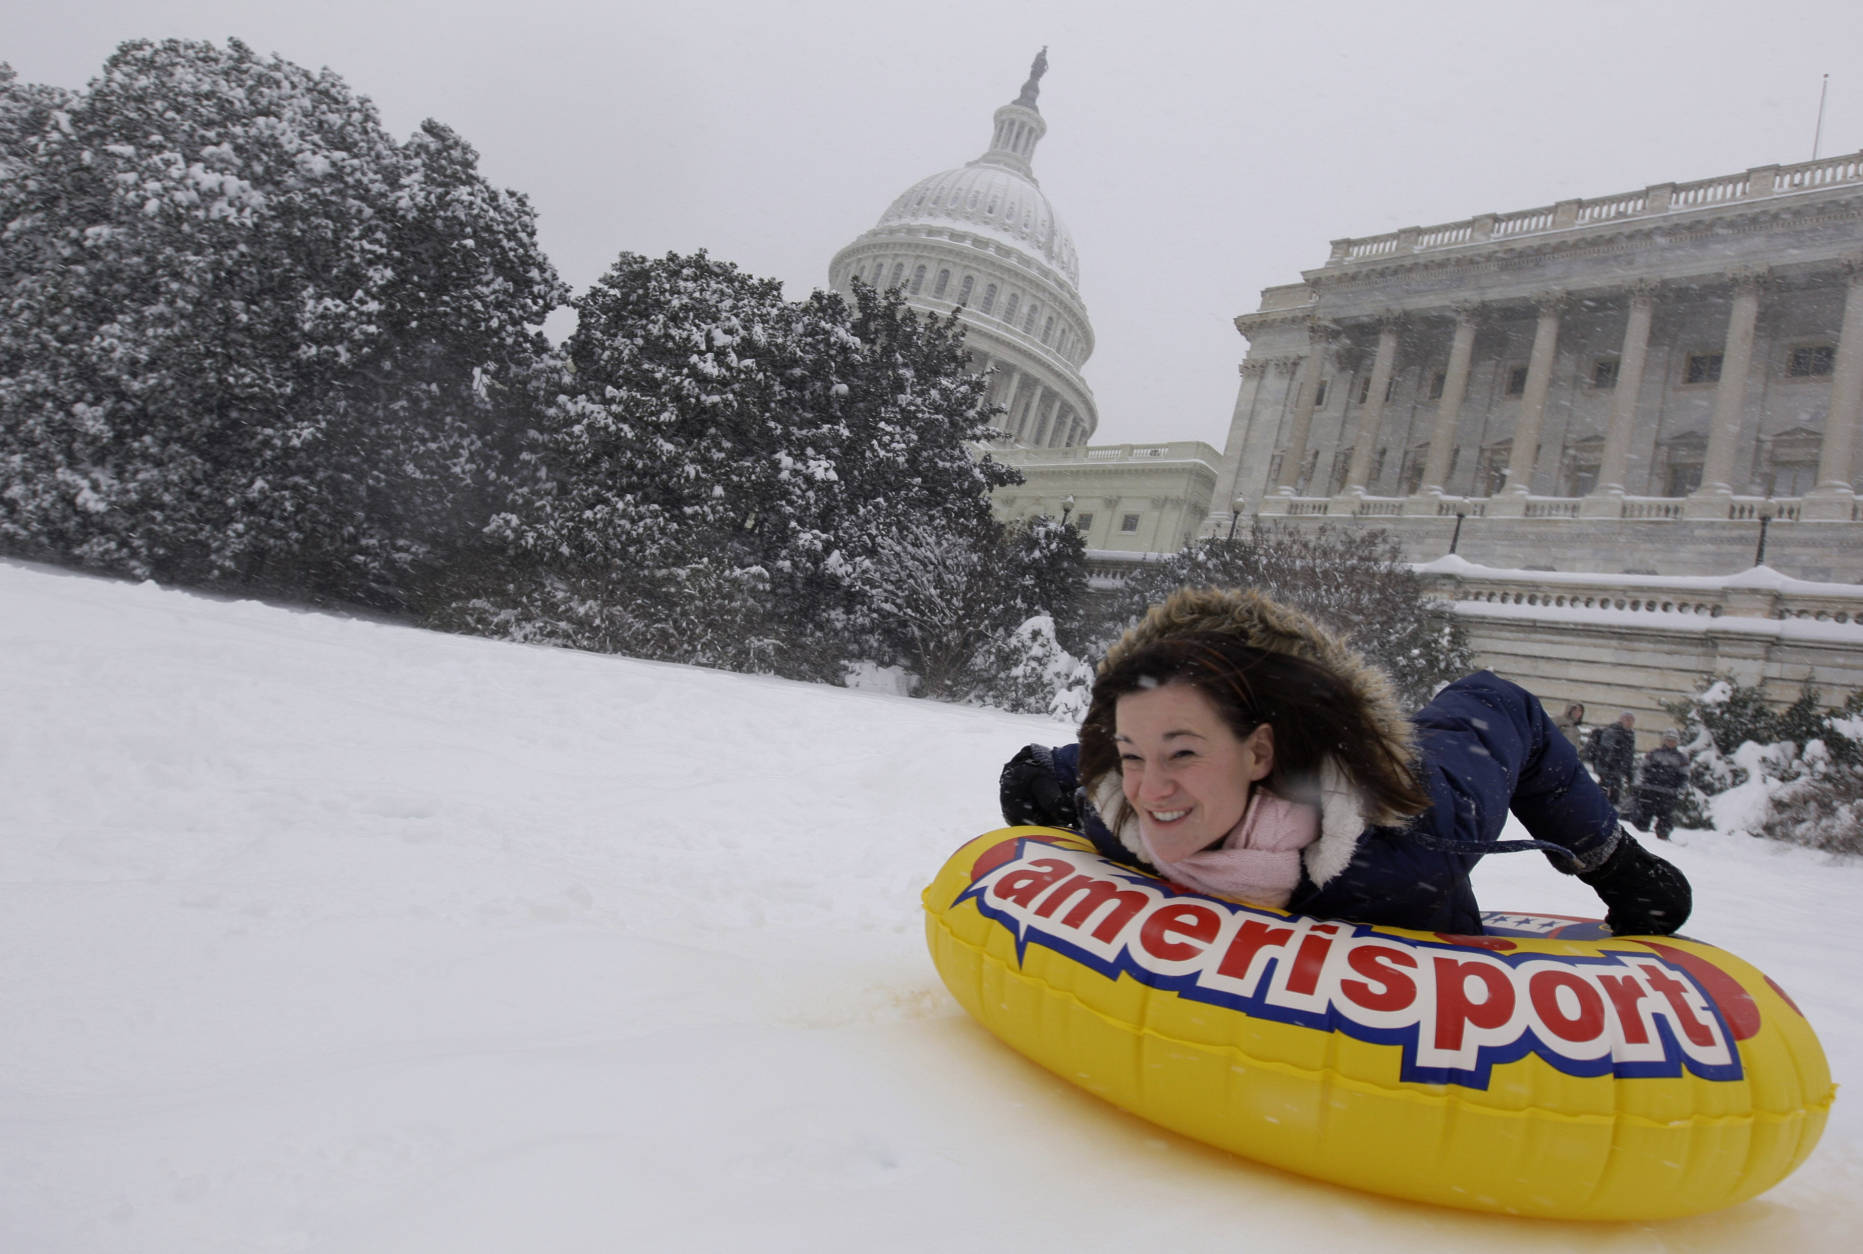 Amanda Gibson uses a tube to slide down the hill in the snow on the West Front of the U.S. Capitol in Washington, Saturday, Dec. 19, 2009.(AP Photo/Alex Brandon)